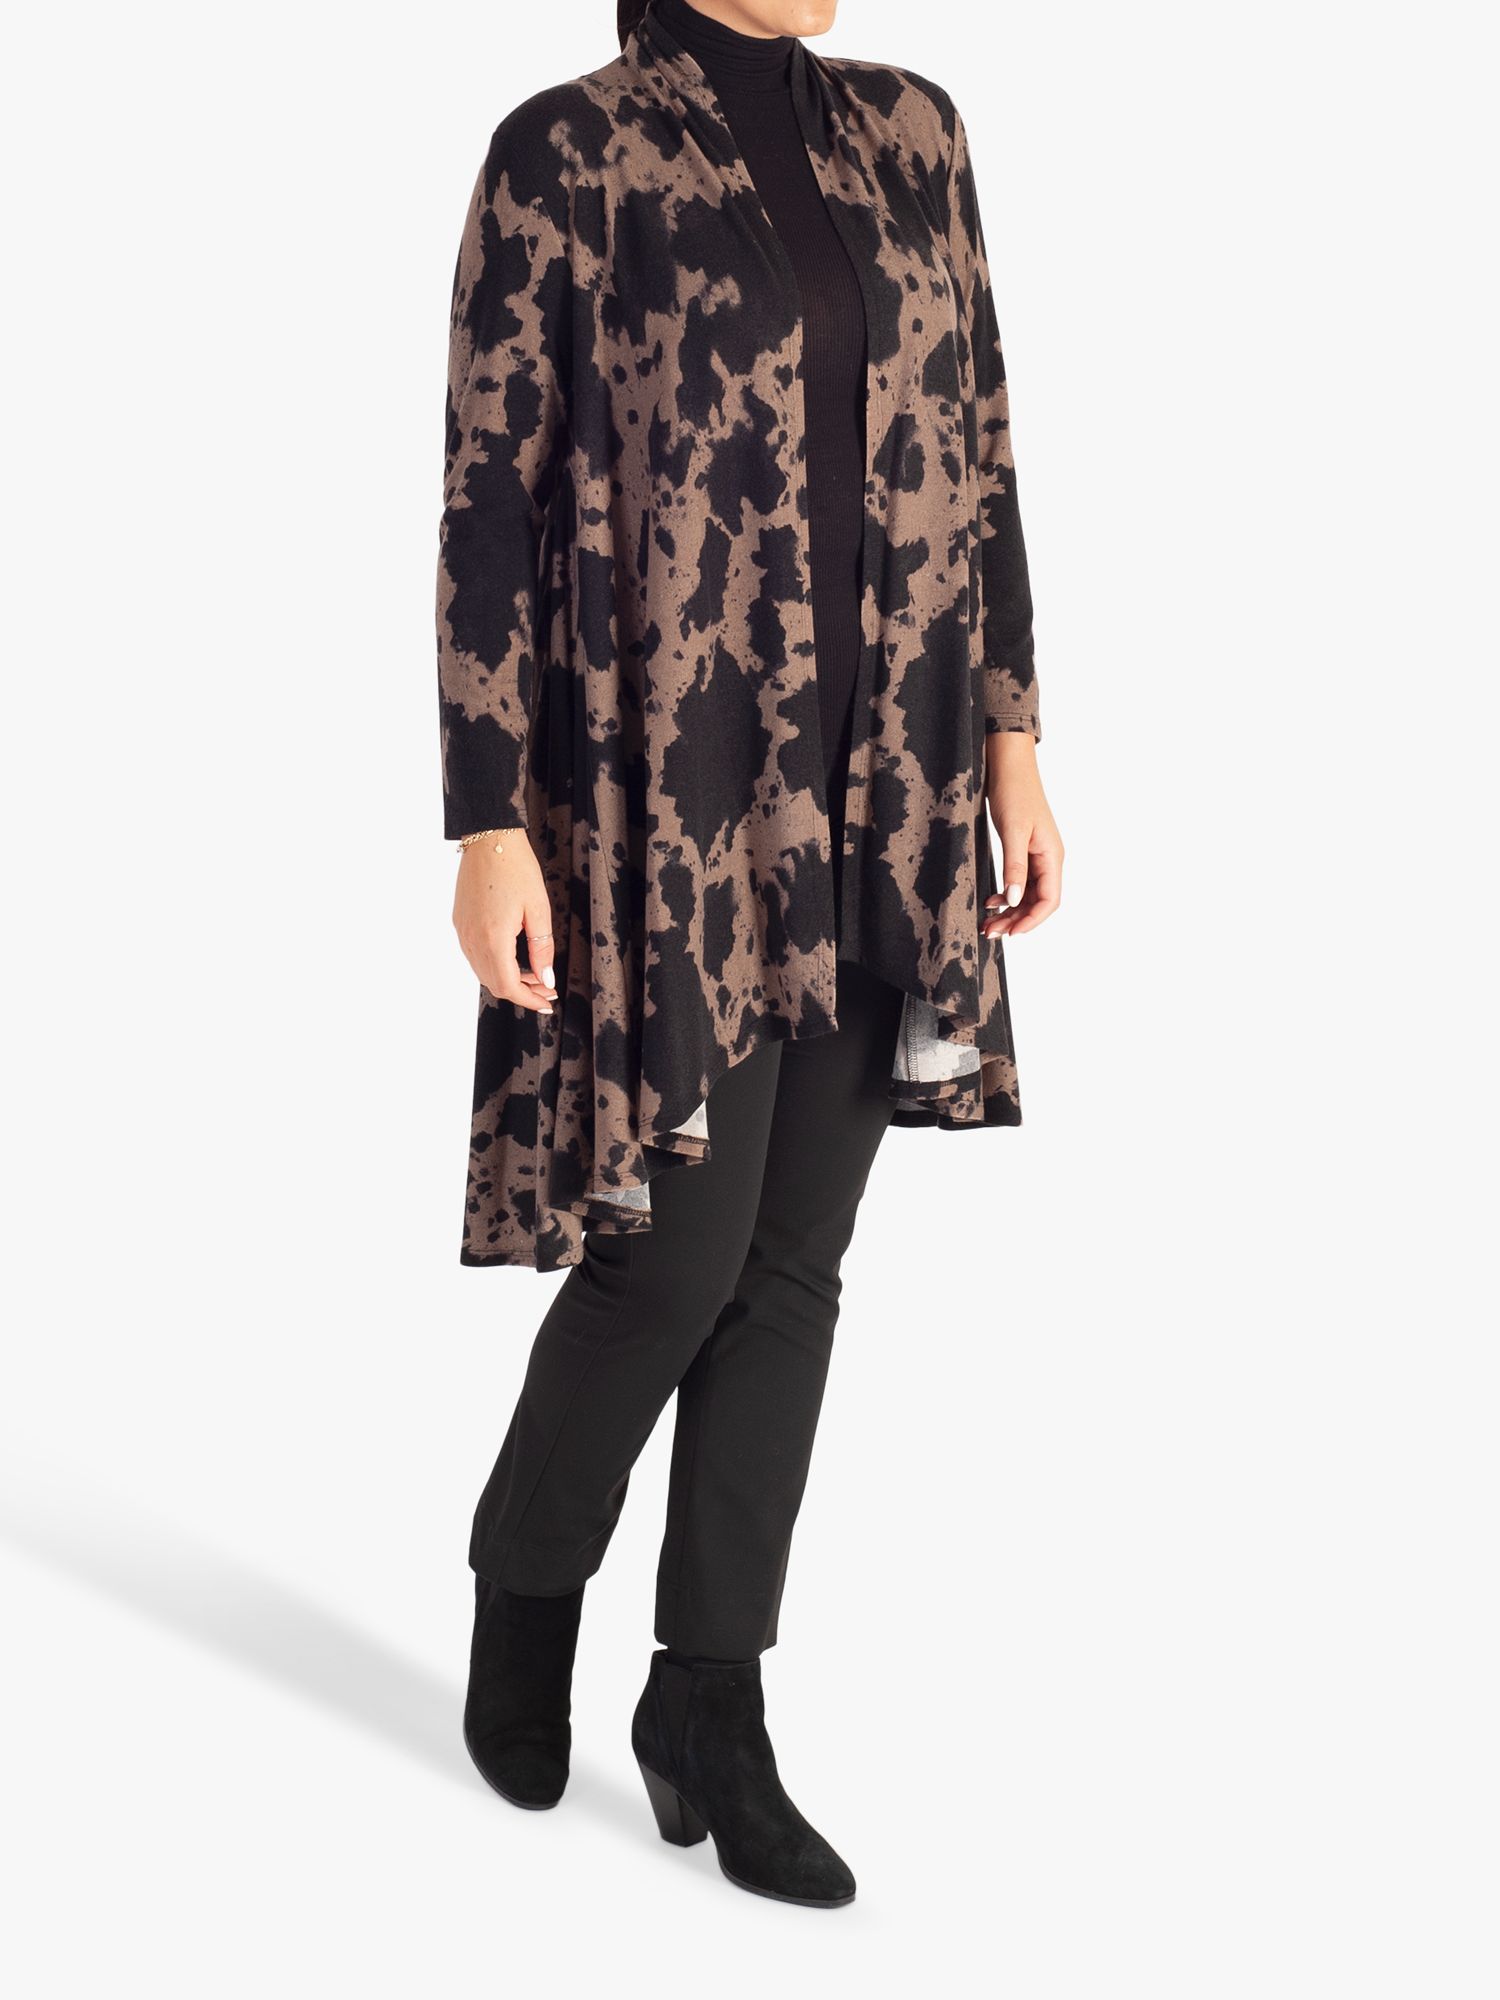 Buy chesca Abstract Print Longline Jersey Cardigan Online at johnlewis.com